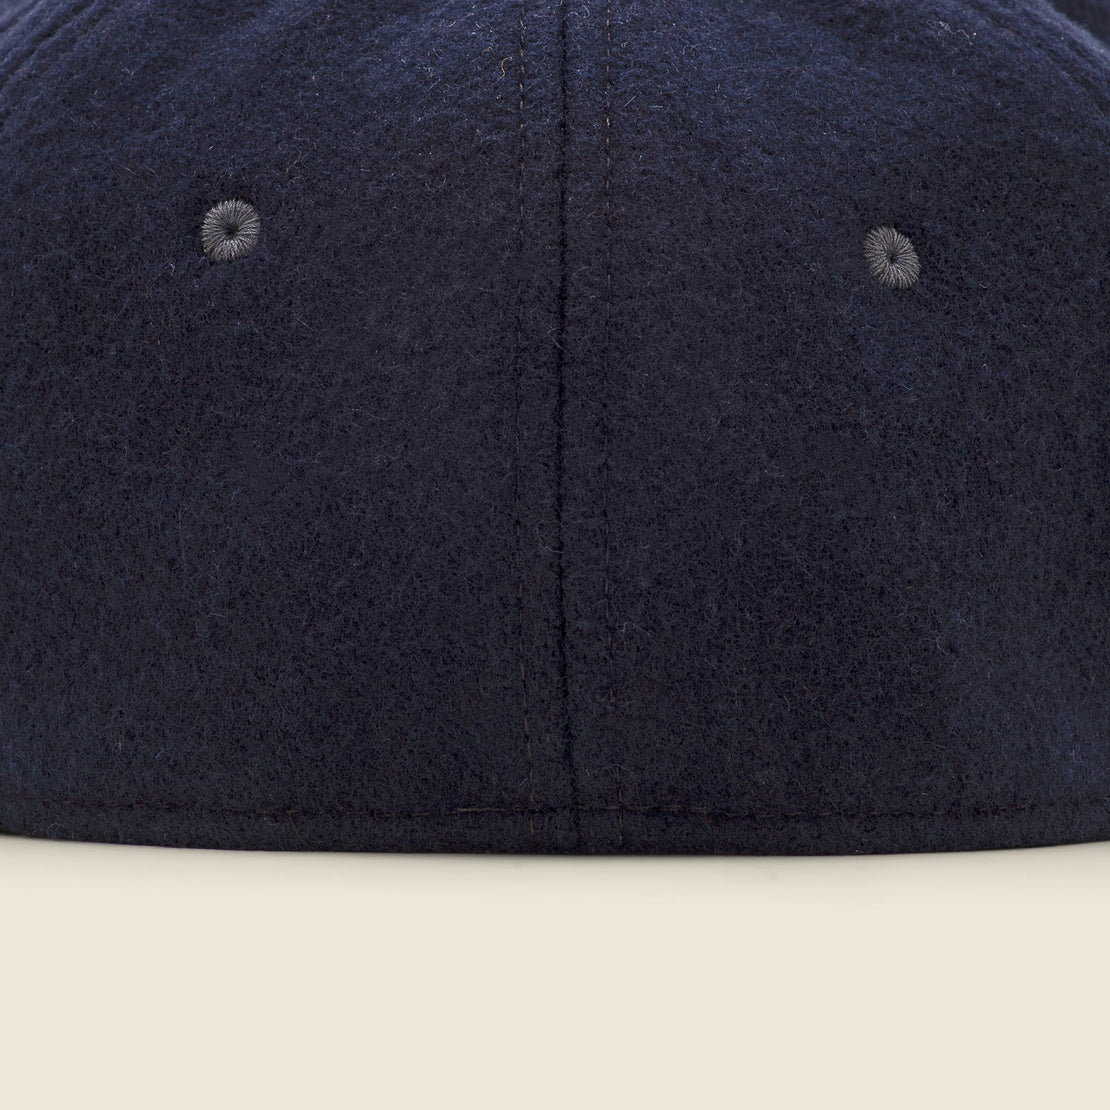 Wool Felt Ball Cap - Navy - RRL - STAG Provisions - Accessories - Hats